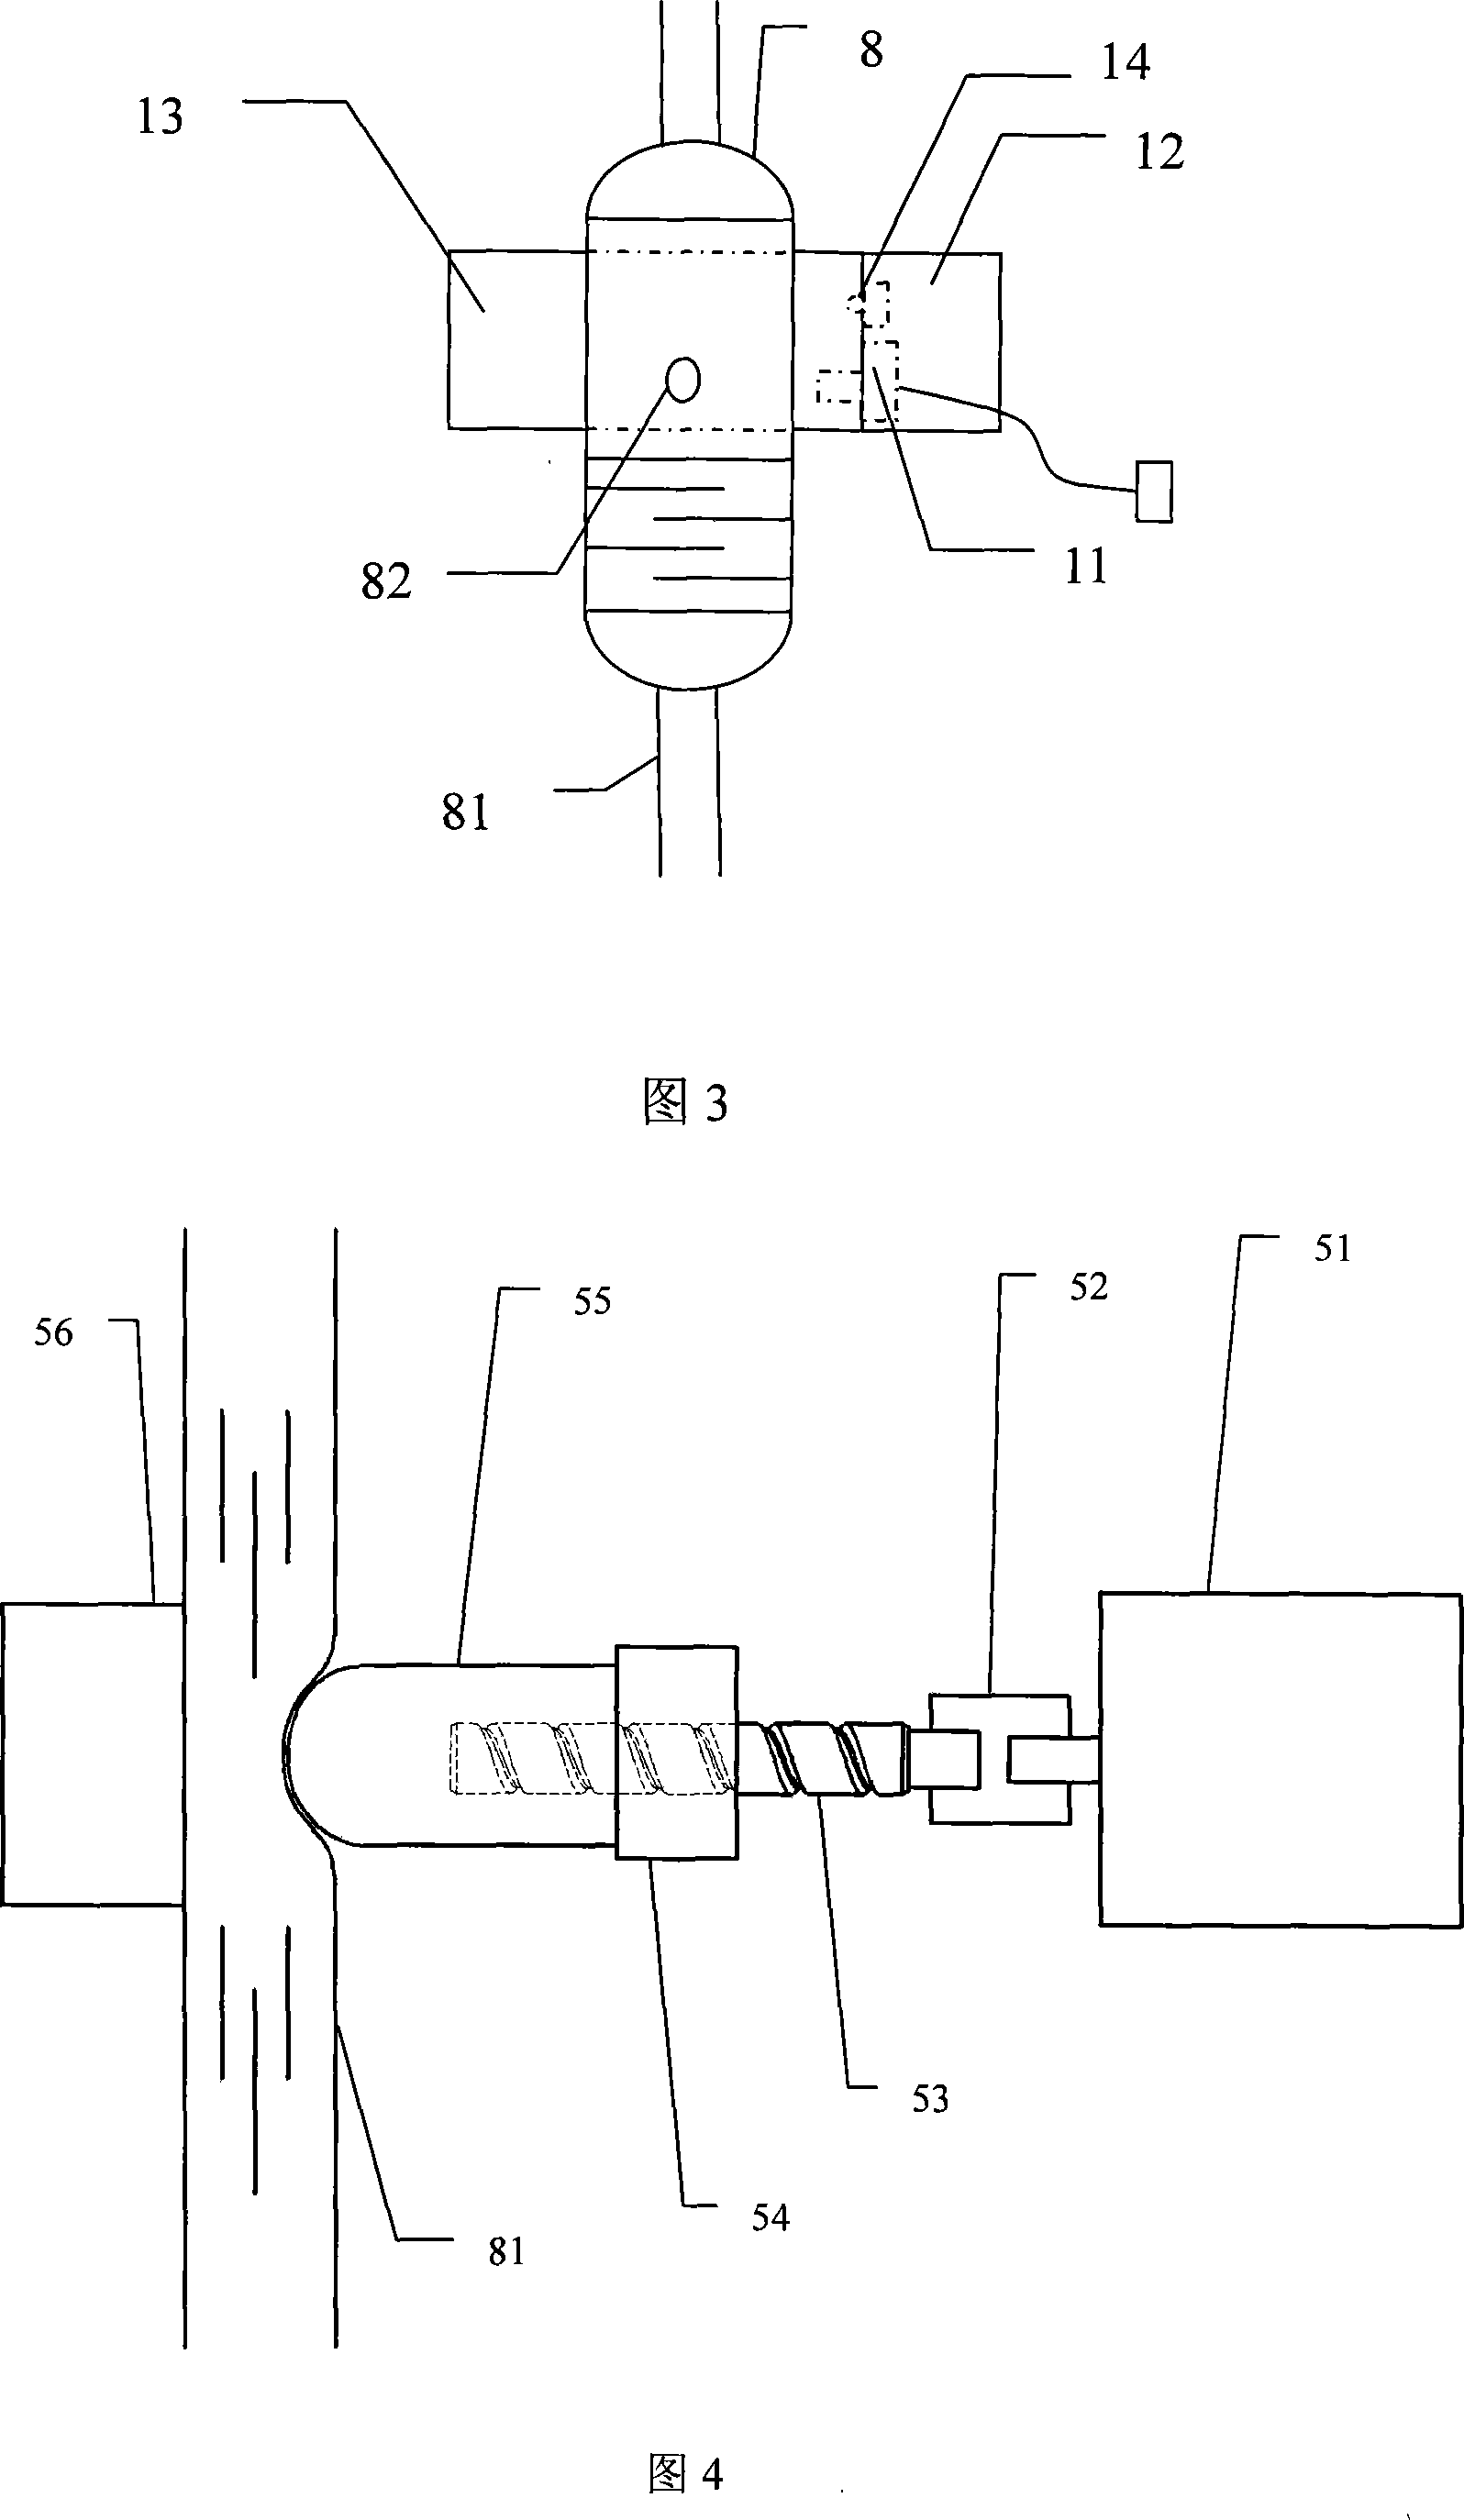 System for monitoring and controlling medical transfusion speed based on machine vision